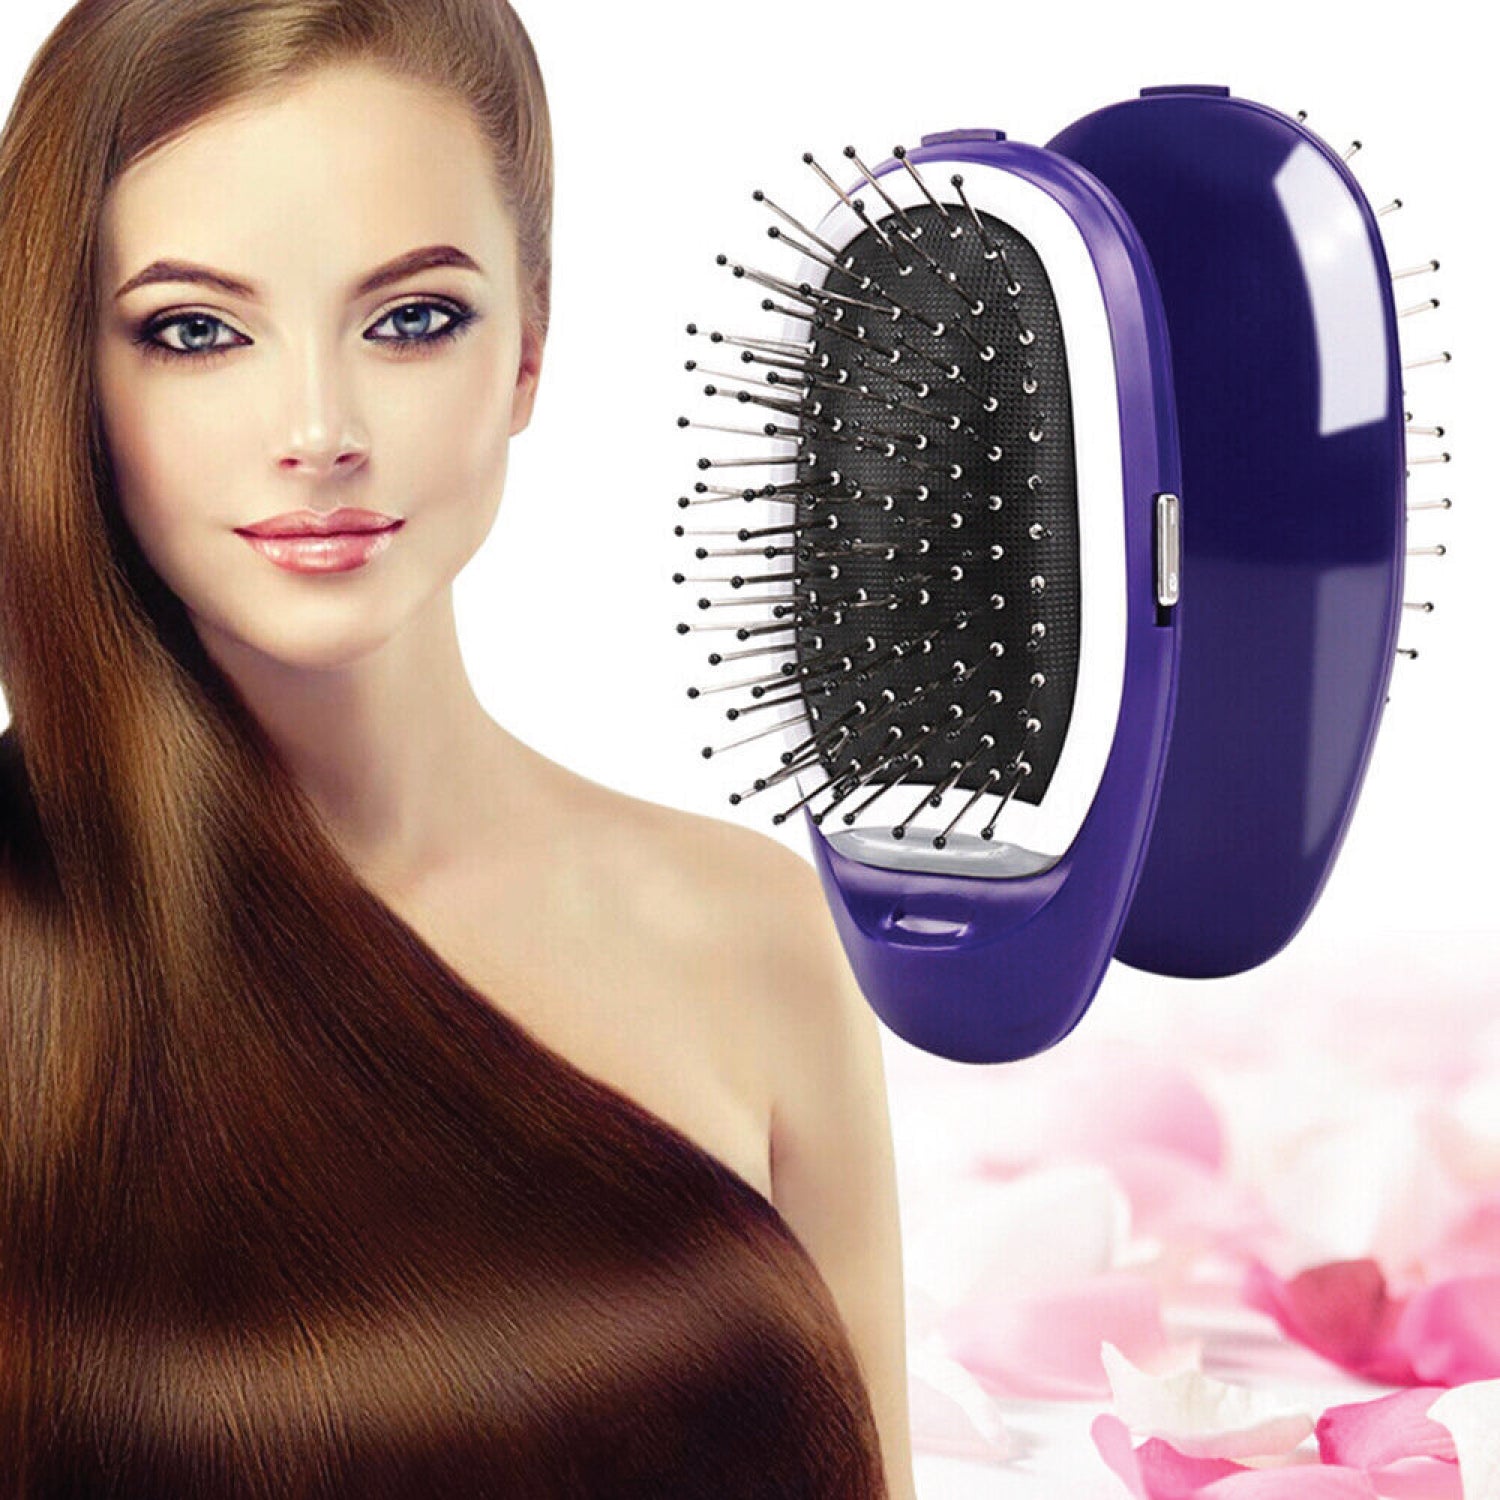 Electric Scalp Massage for Hair Growth - Queenwill Head Massager Shampoo Brush for Deep Hair Cleaning and Head Blood Circulation, Battery Powered & Waterproof